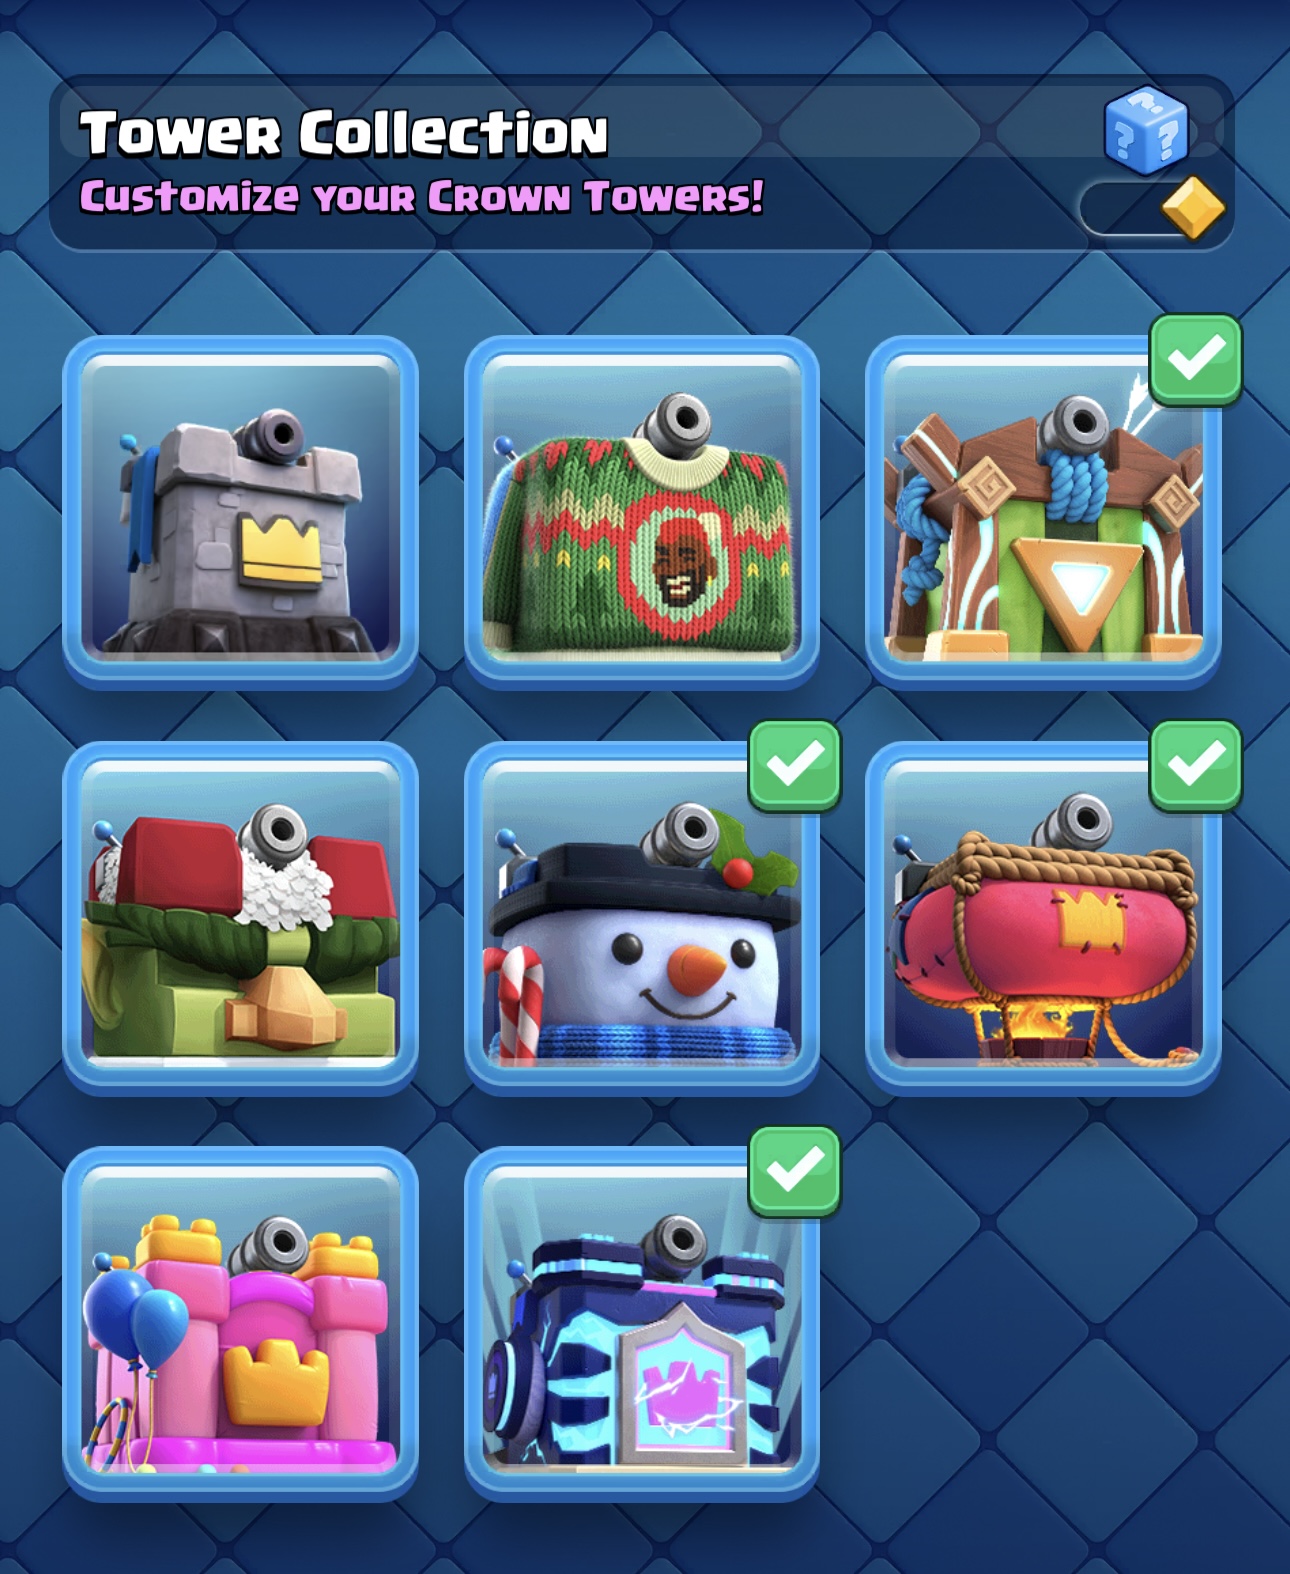 Super stacked clash royale account 9000tr   100+ emotes level 15 King tower and cards and much more ! 